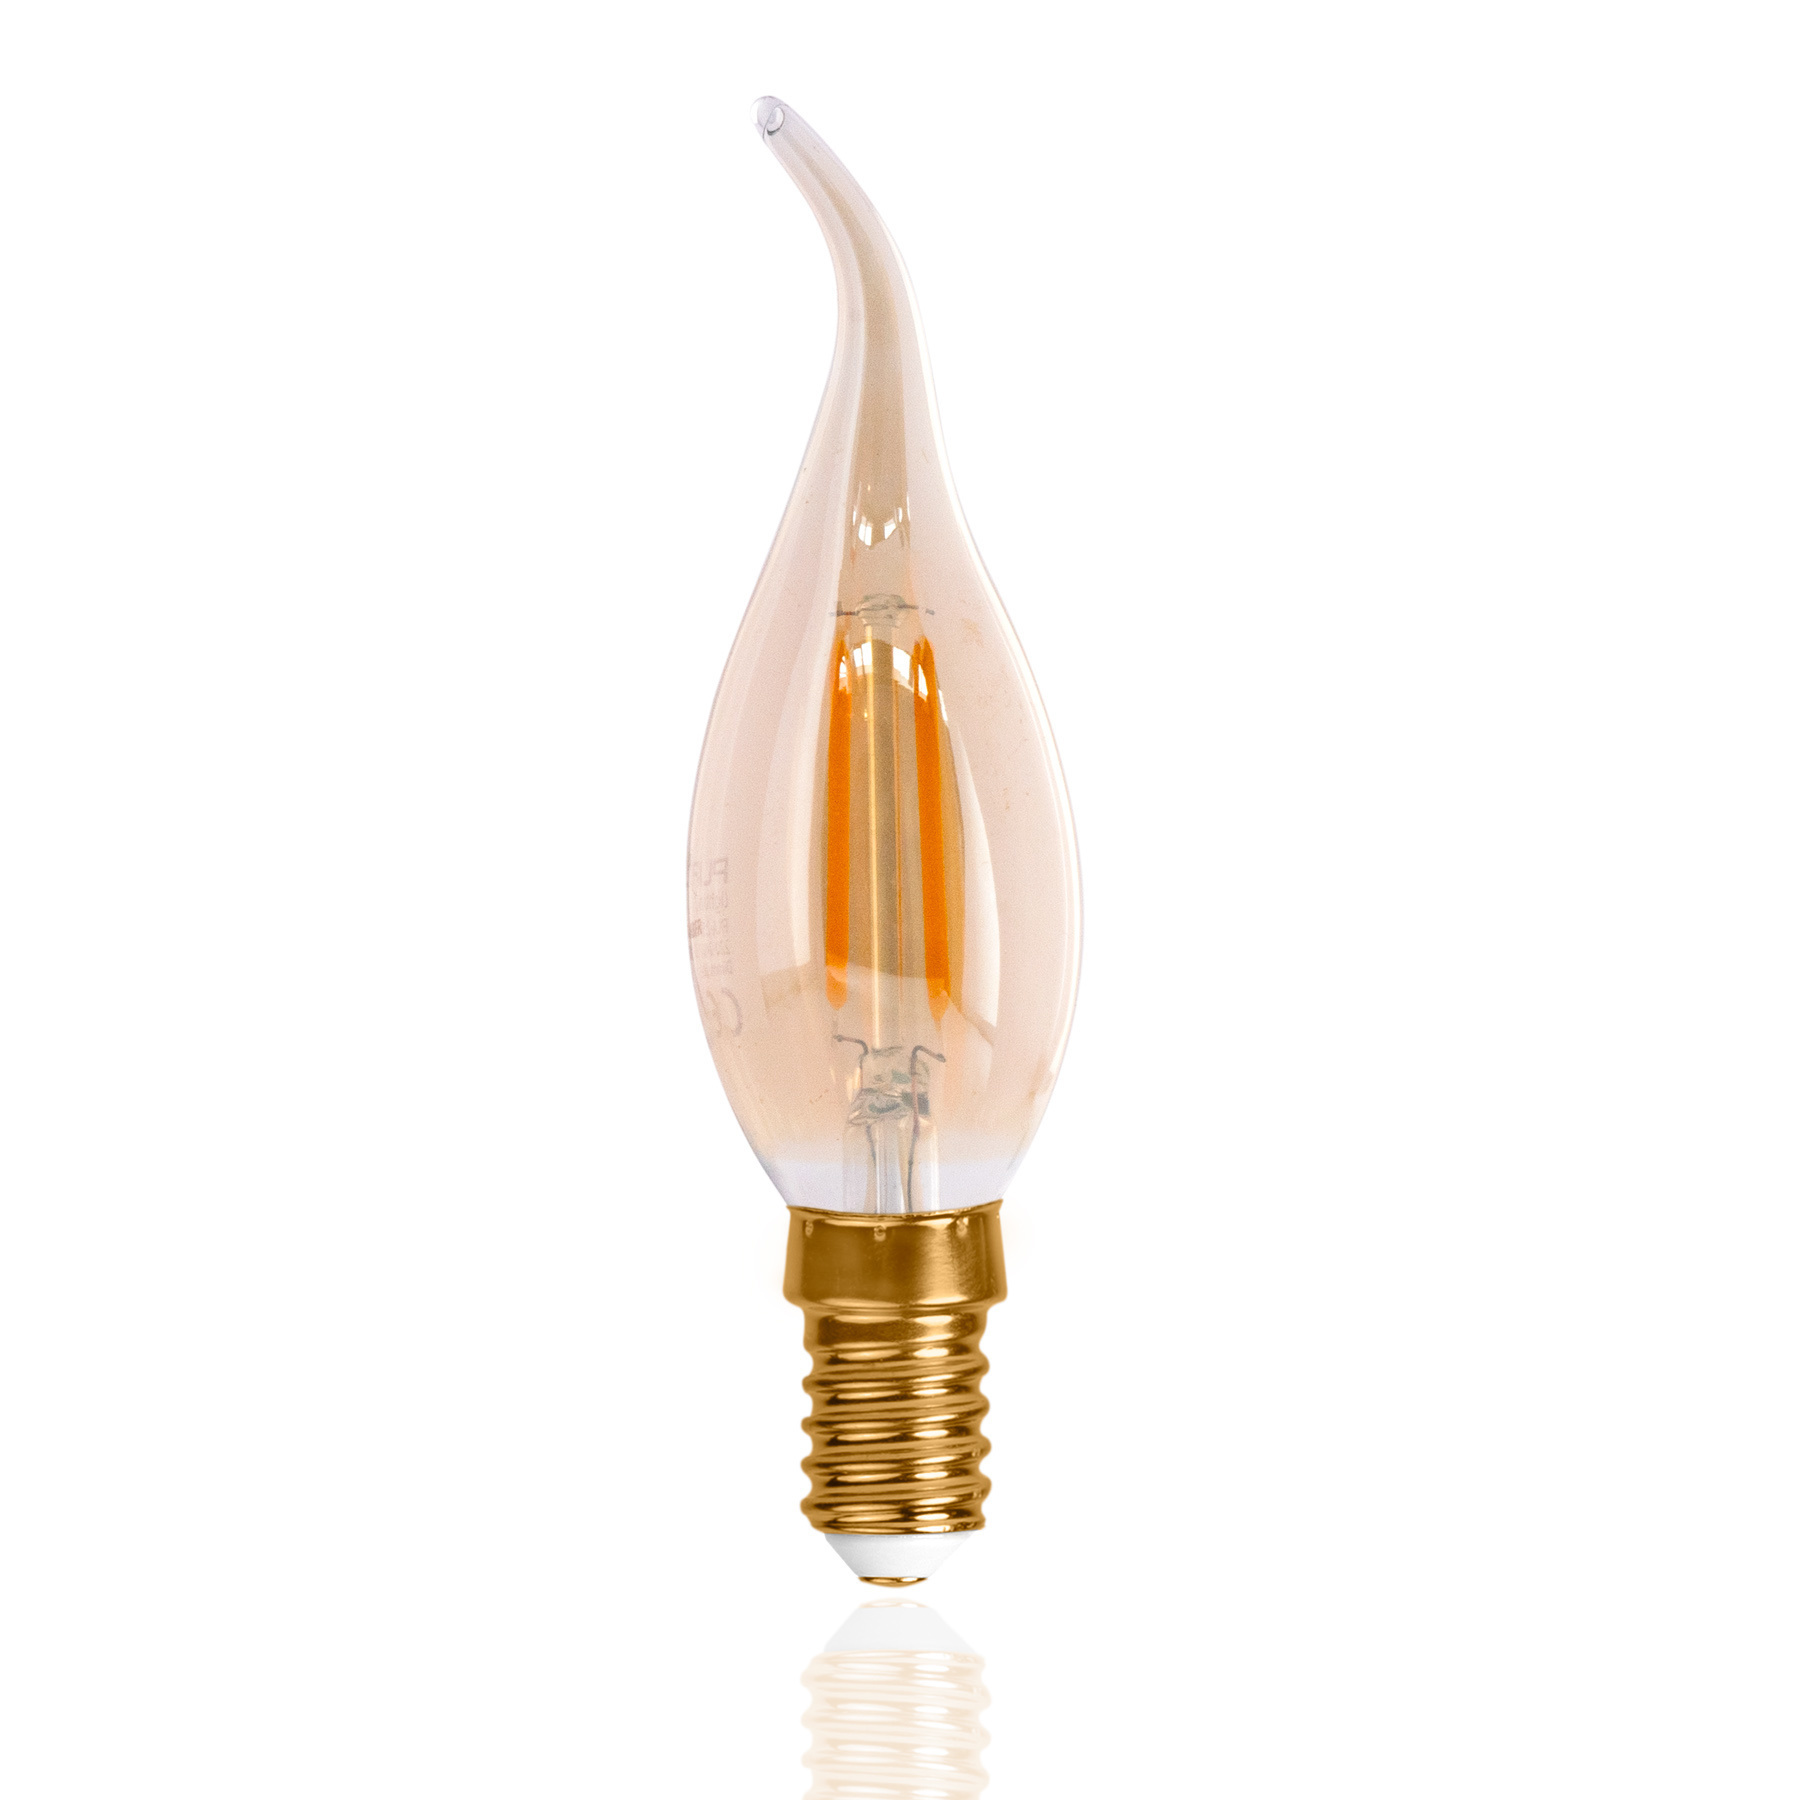 Ampoule LED E14 3,5W - Dimmable - 220-240V AC